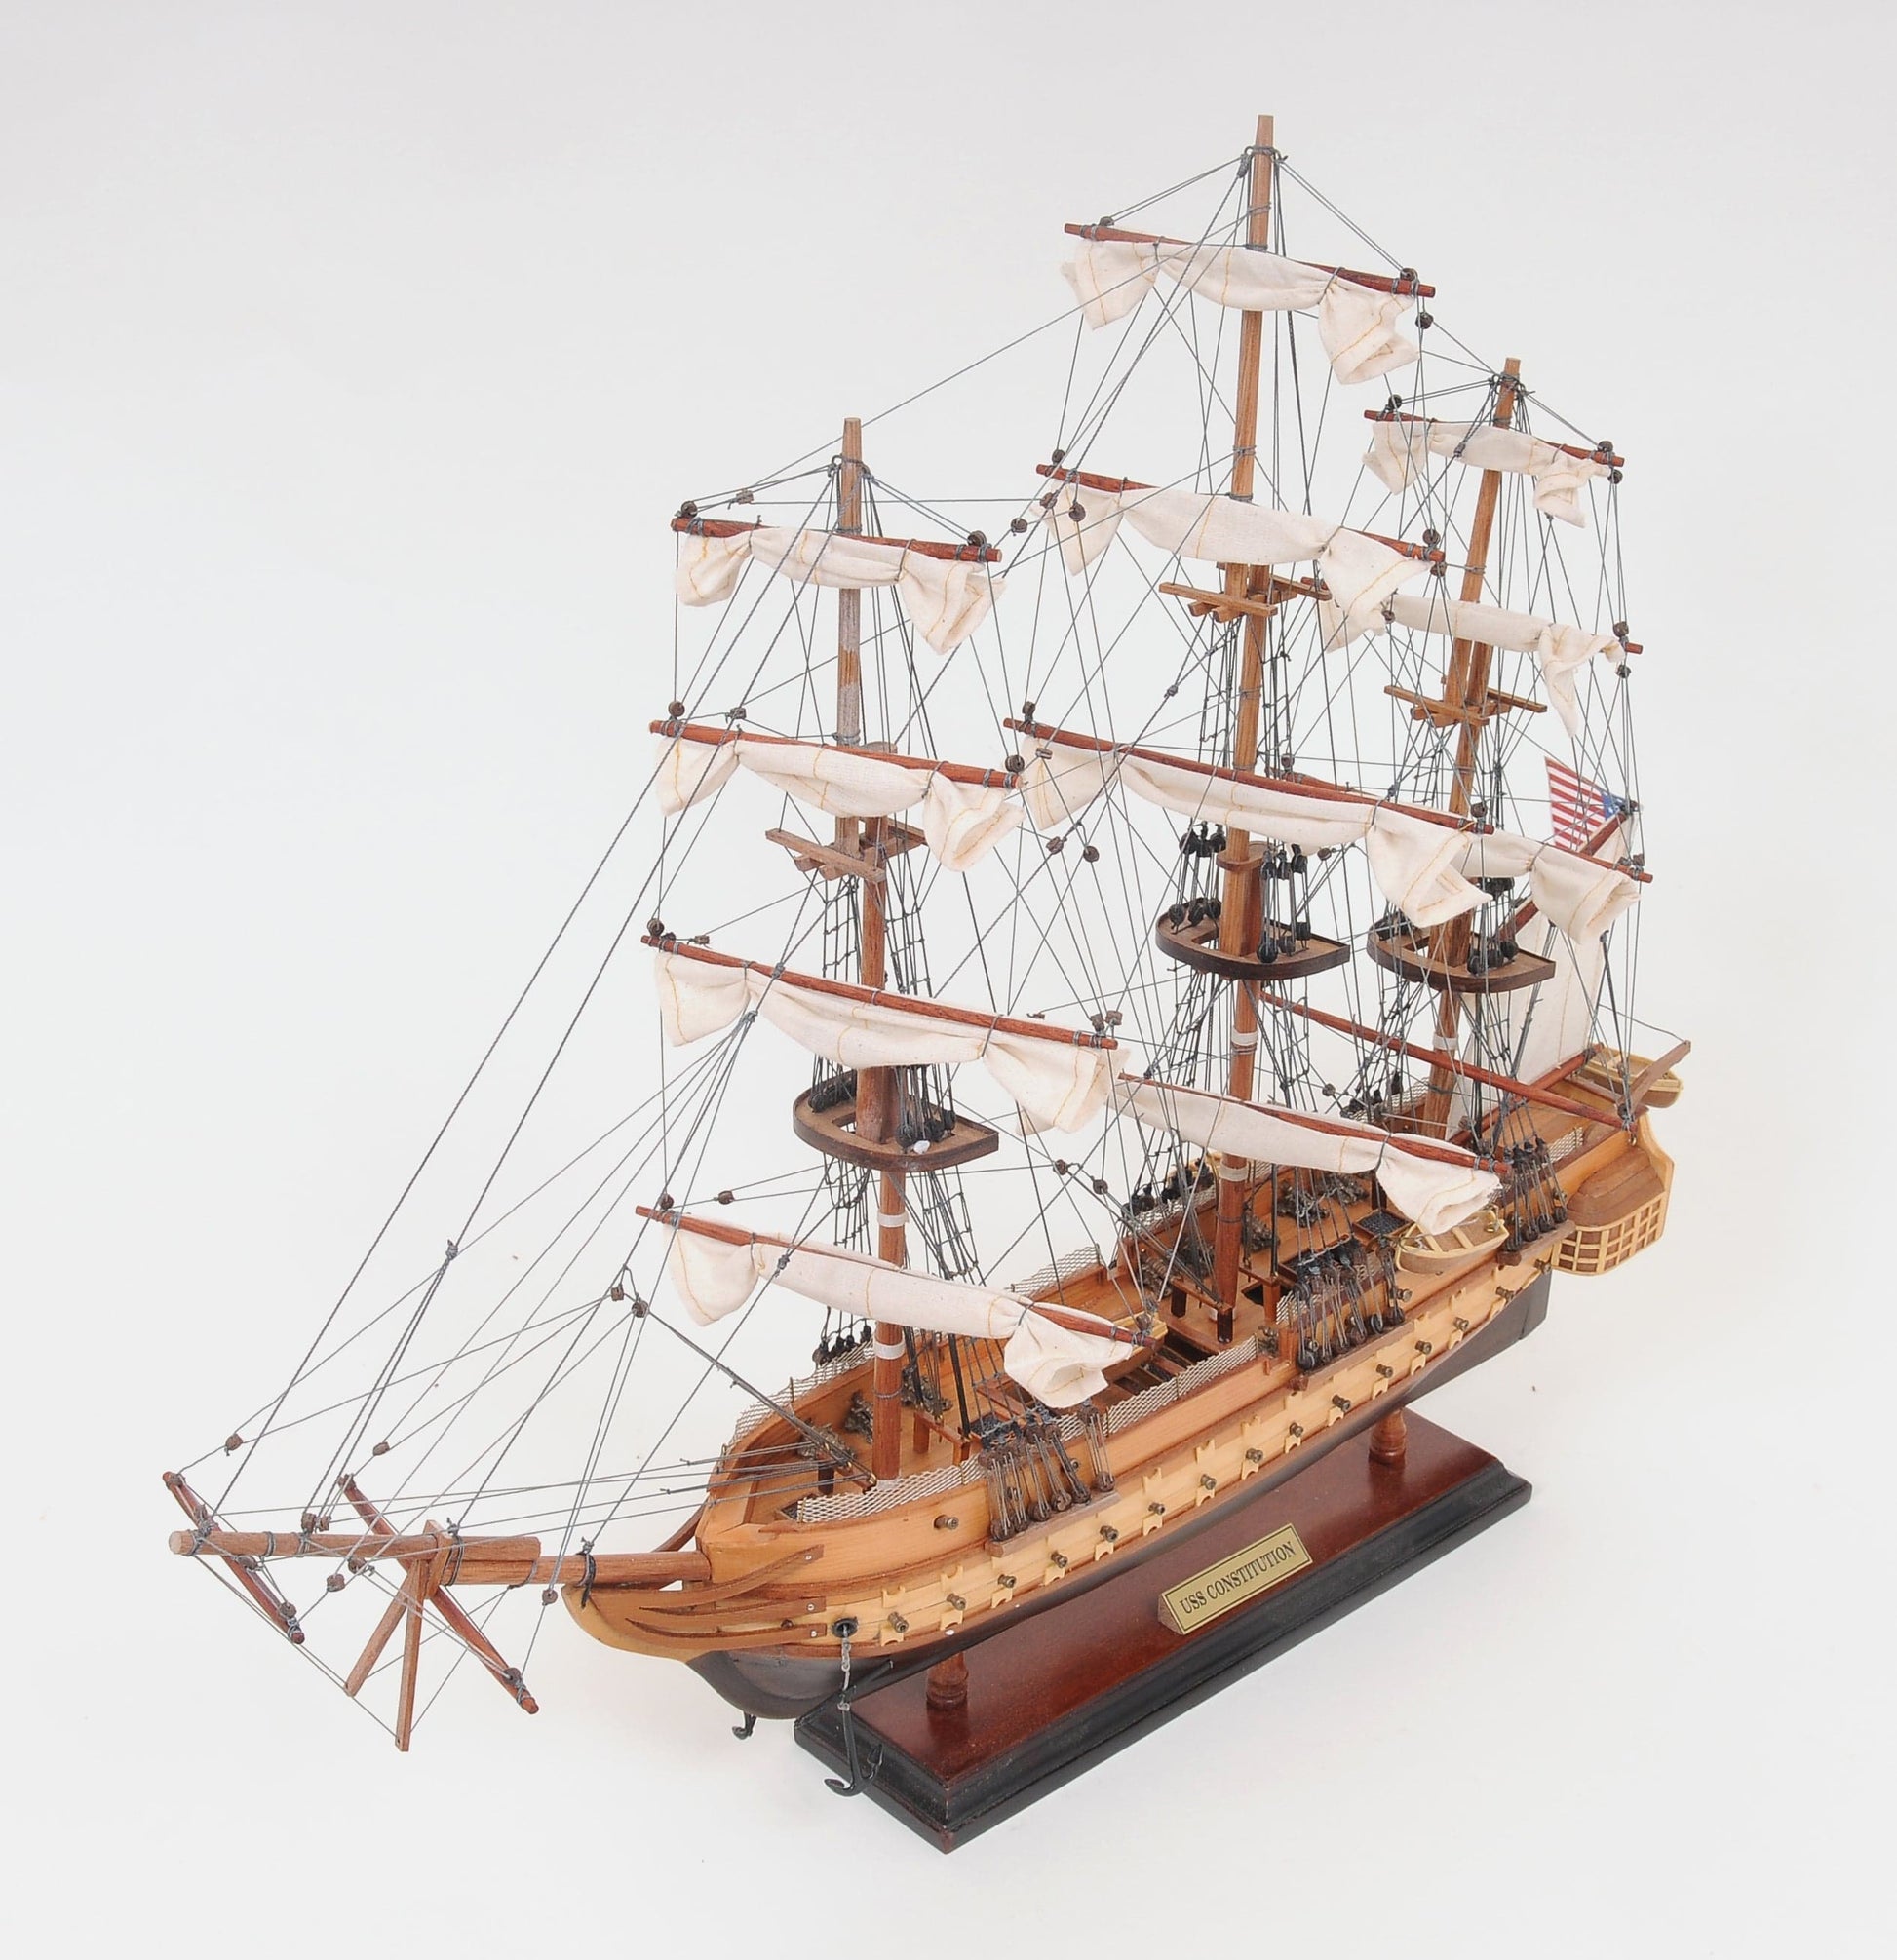 ALDO Hobbies & Creative Arts> Collectibles> Scale Model L: 26.5 W: 11 H: 49.75 Inches / NEW / Wood USS Constitution Tall Ship Wood  Small Model Sailboat Assembled with Floor Display Case